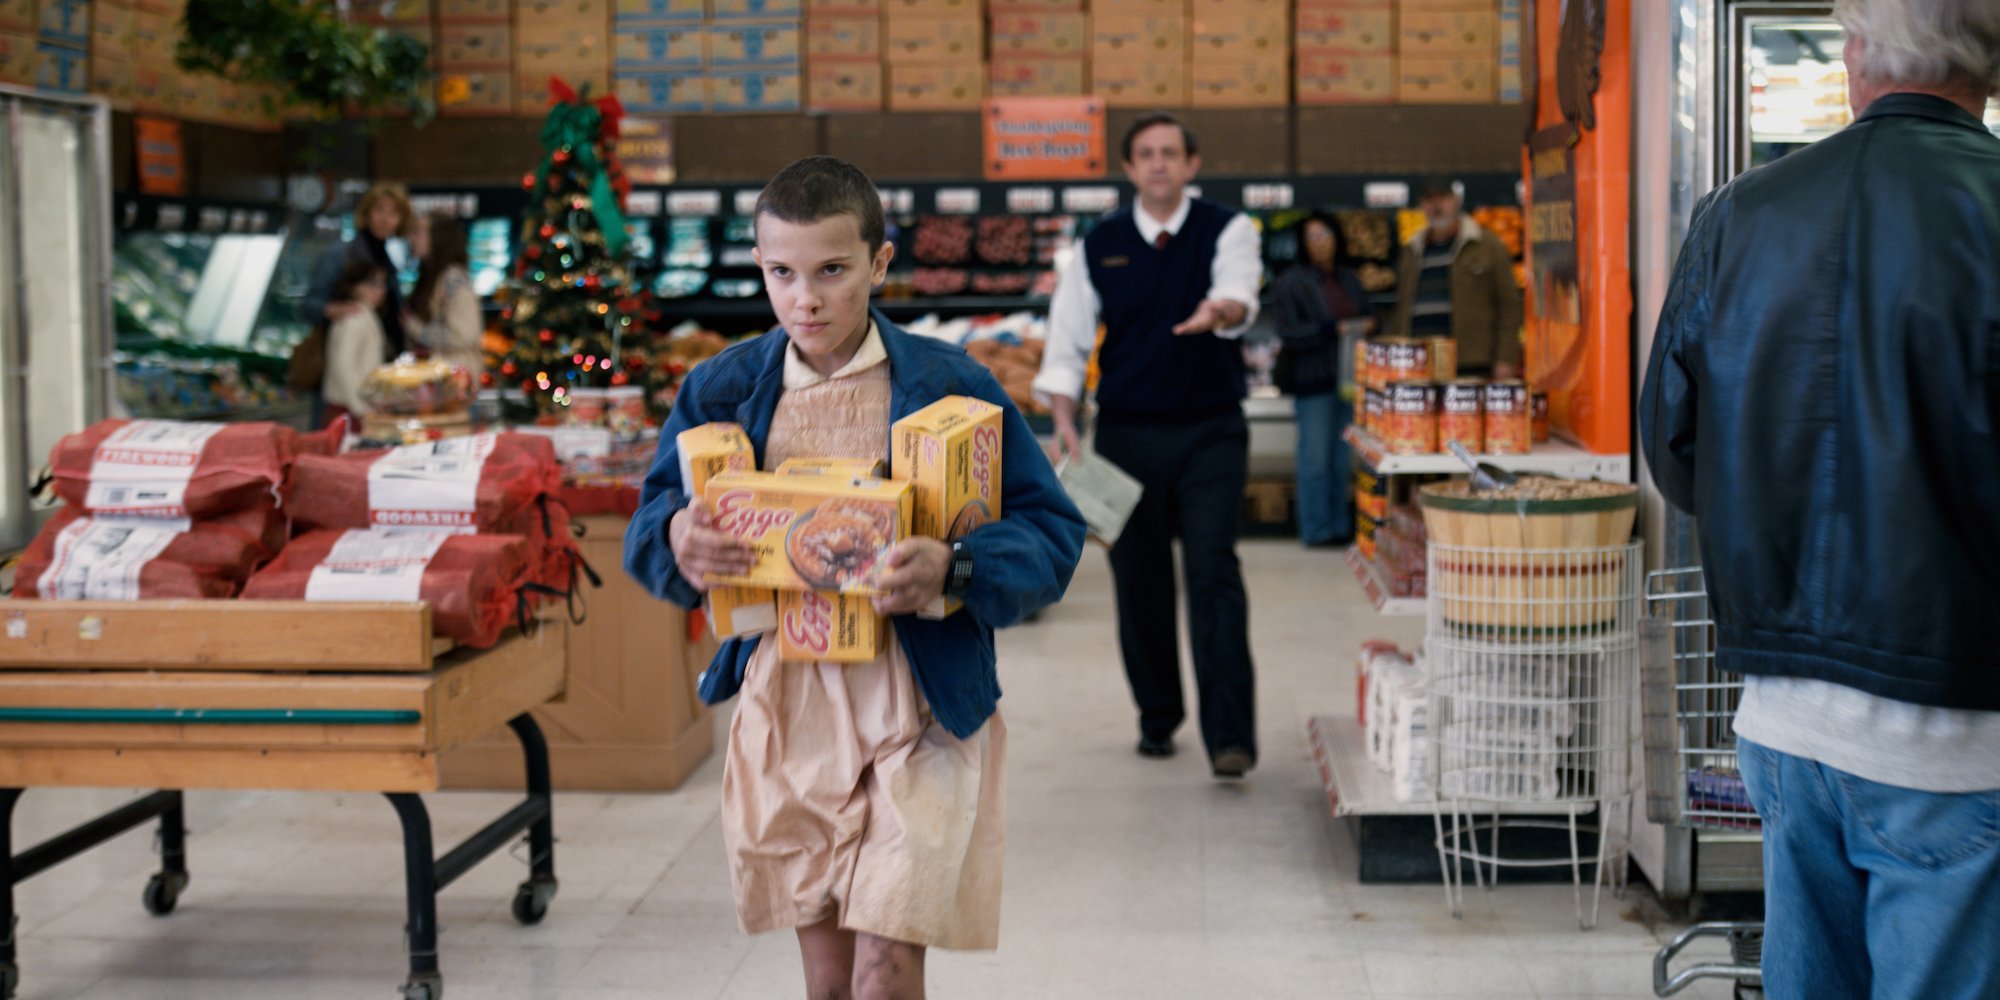 Eleven from 'Stranger Things' in Season 1 in a pink dress and navy jacket with a box of Eggos.